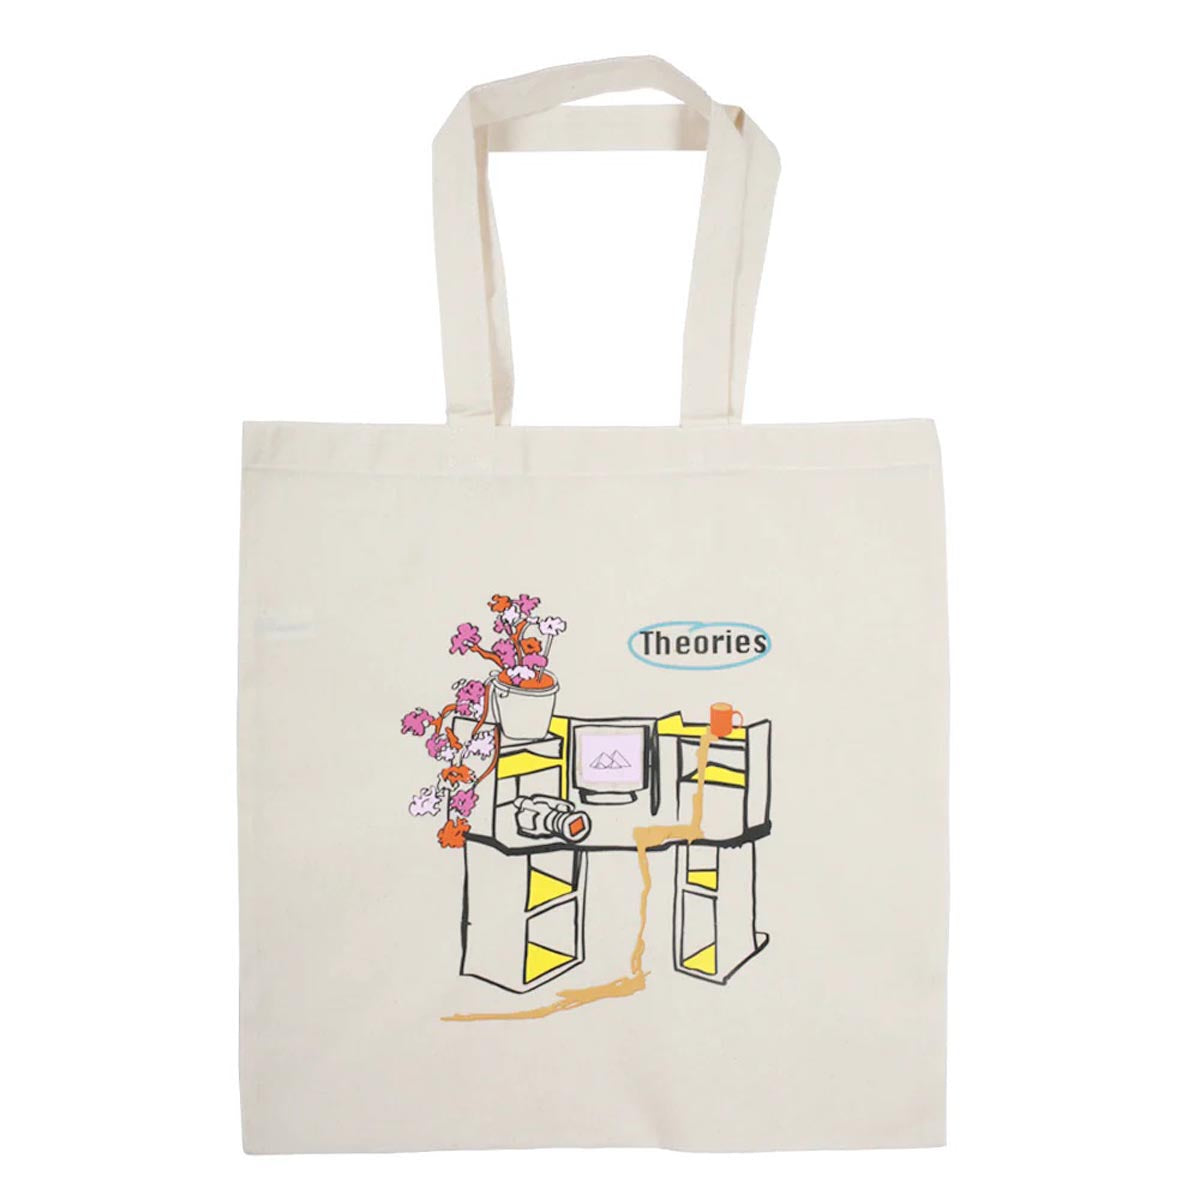 Theories Get Off The Internet Tote Bag - Natural image 1